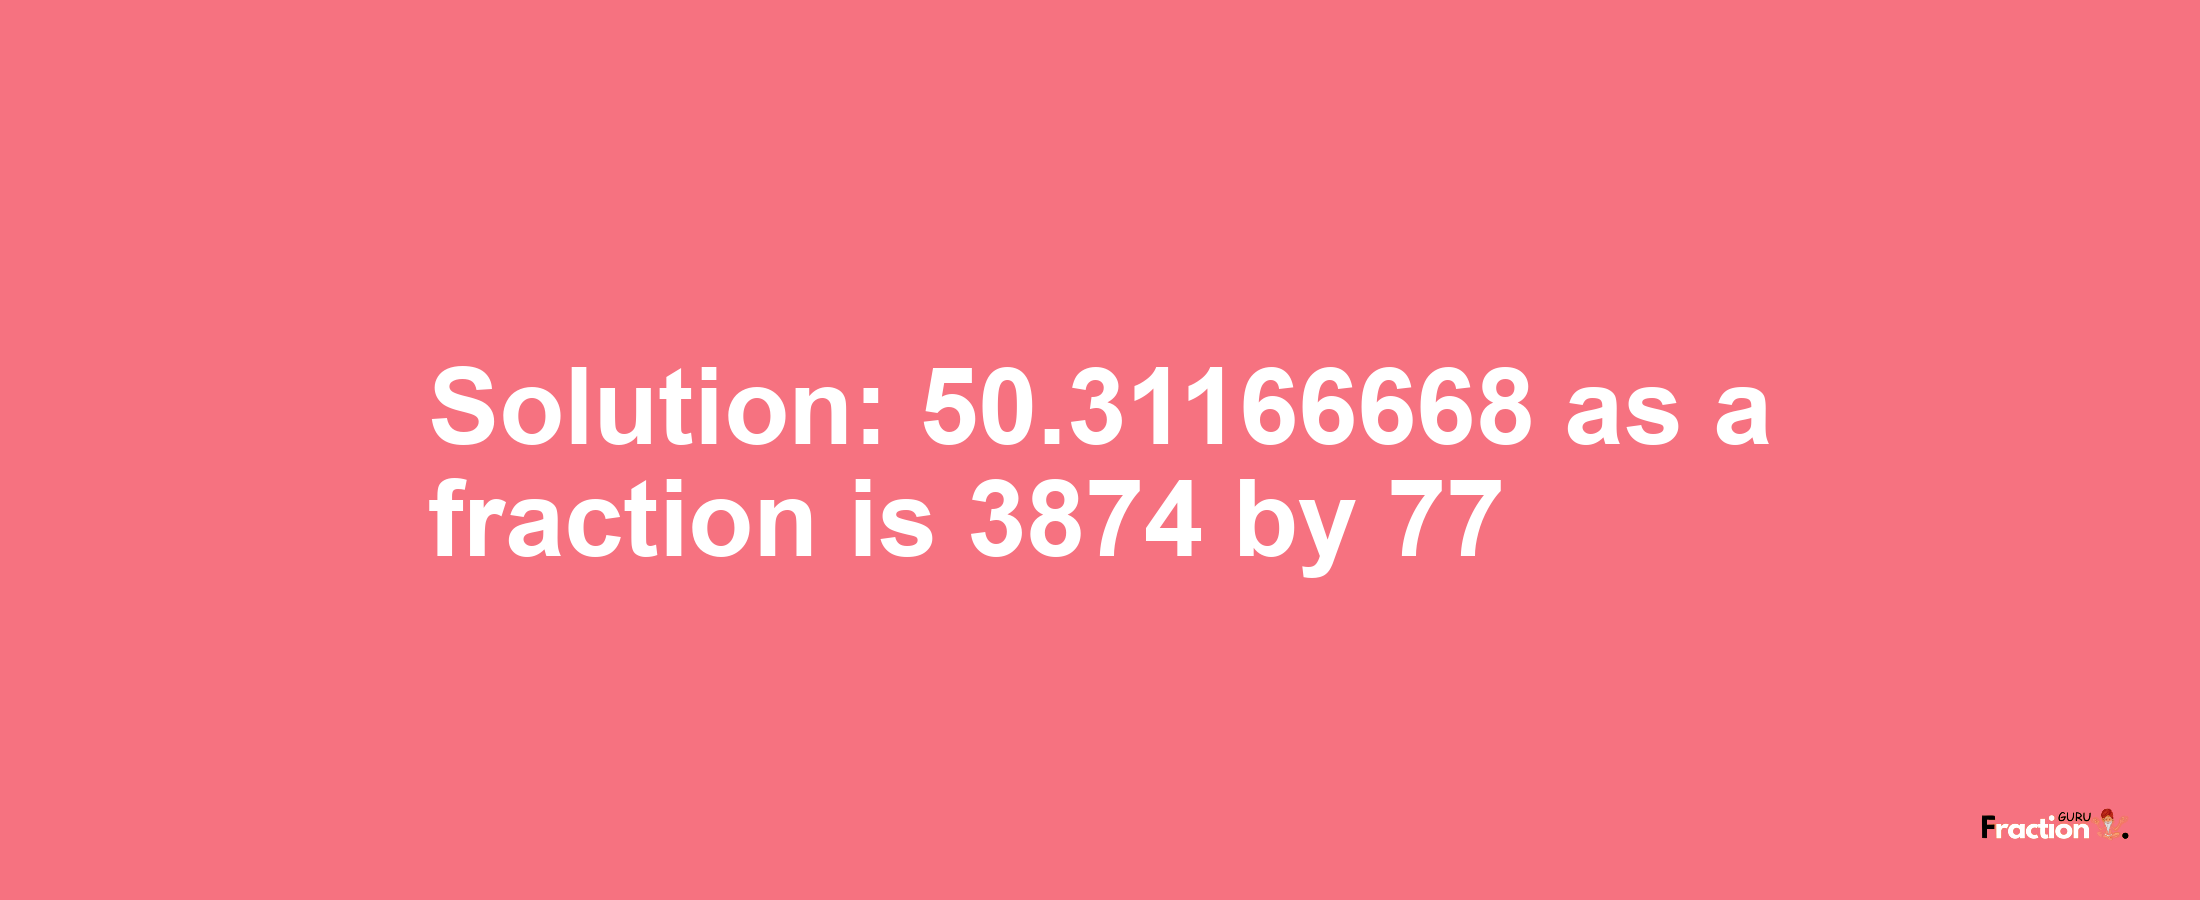 Solution:50.31166668 as a fraction is 3874/77